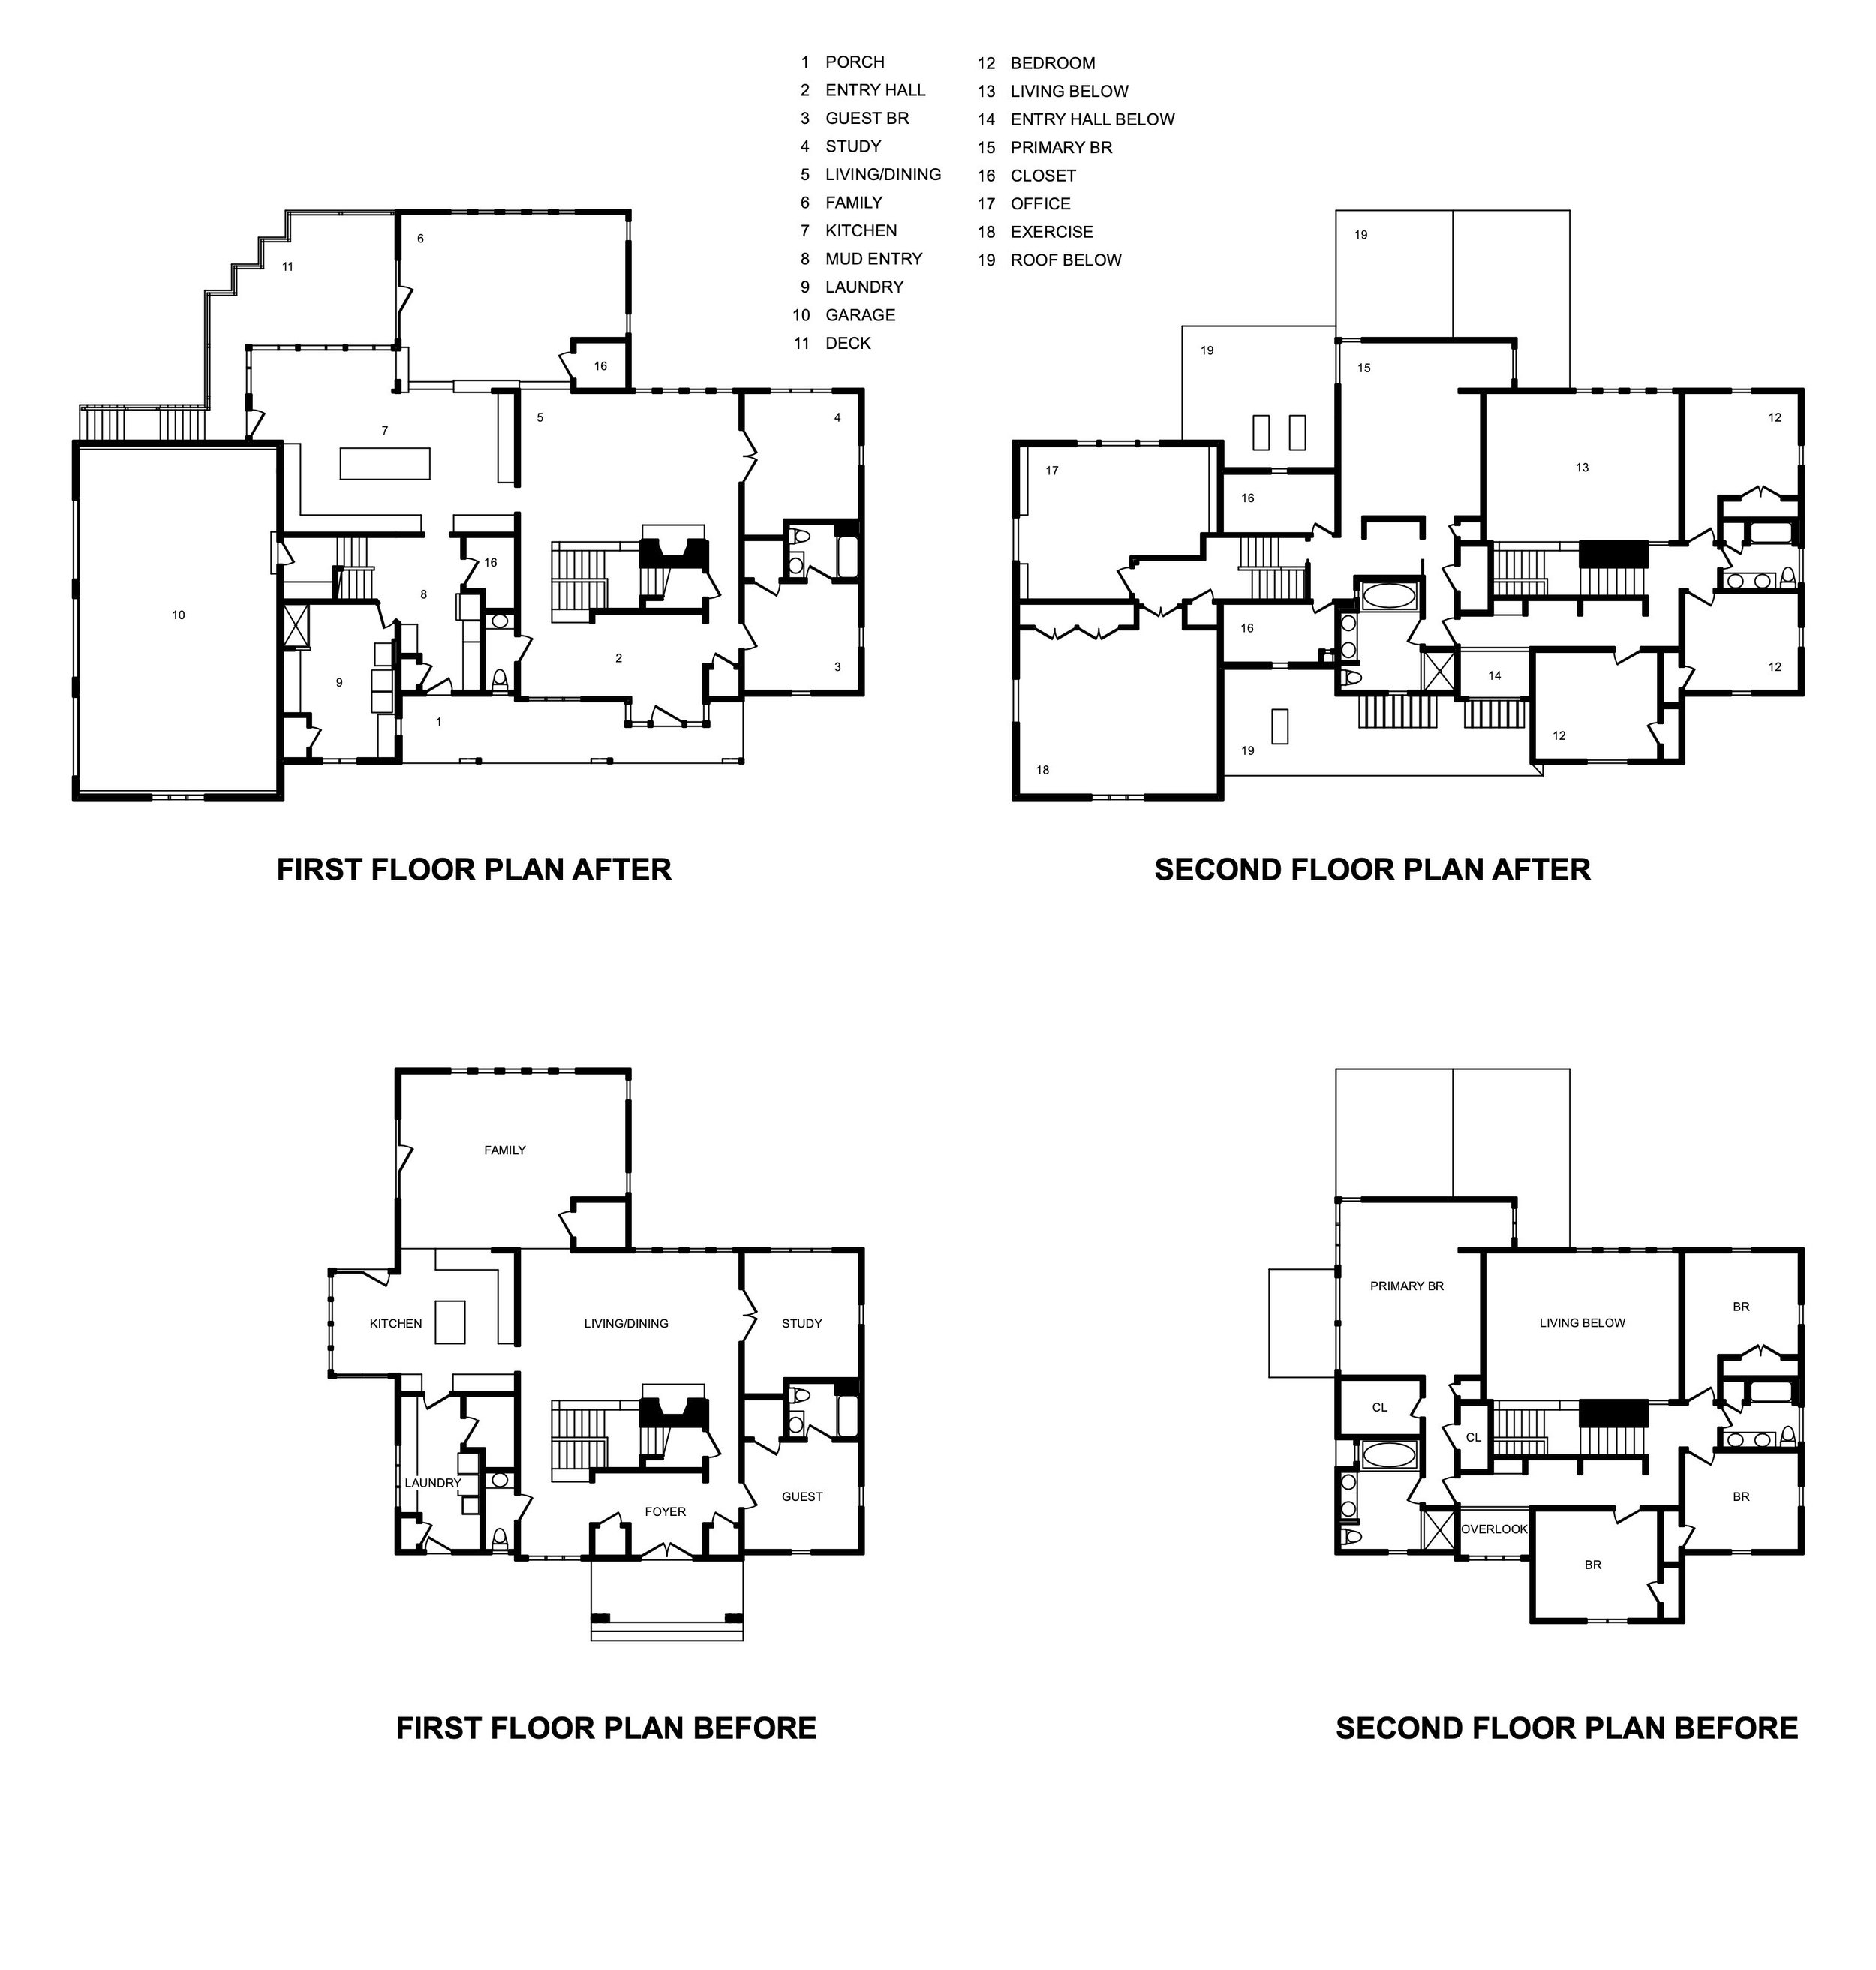 Woodvalley: Floor Plans - Before & After